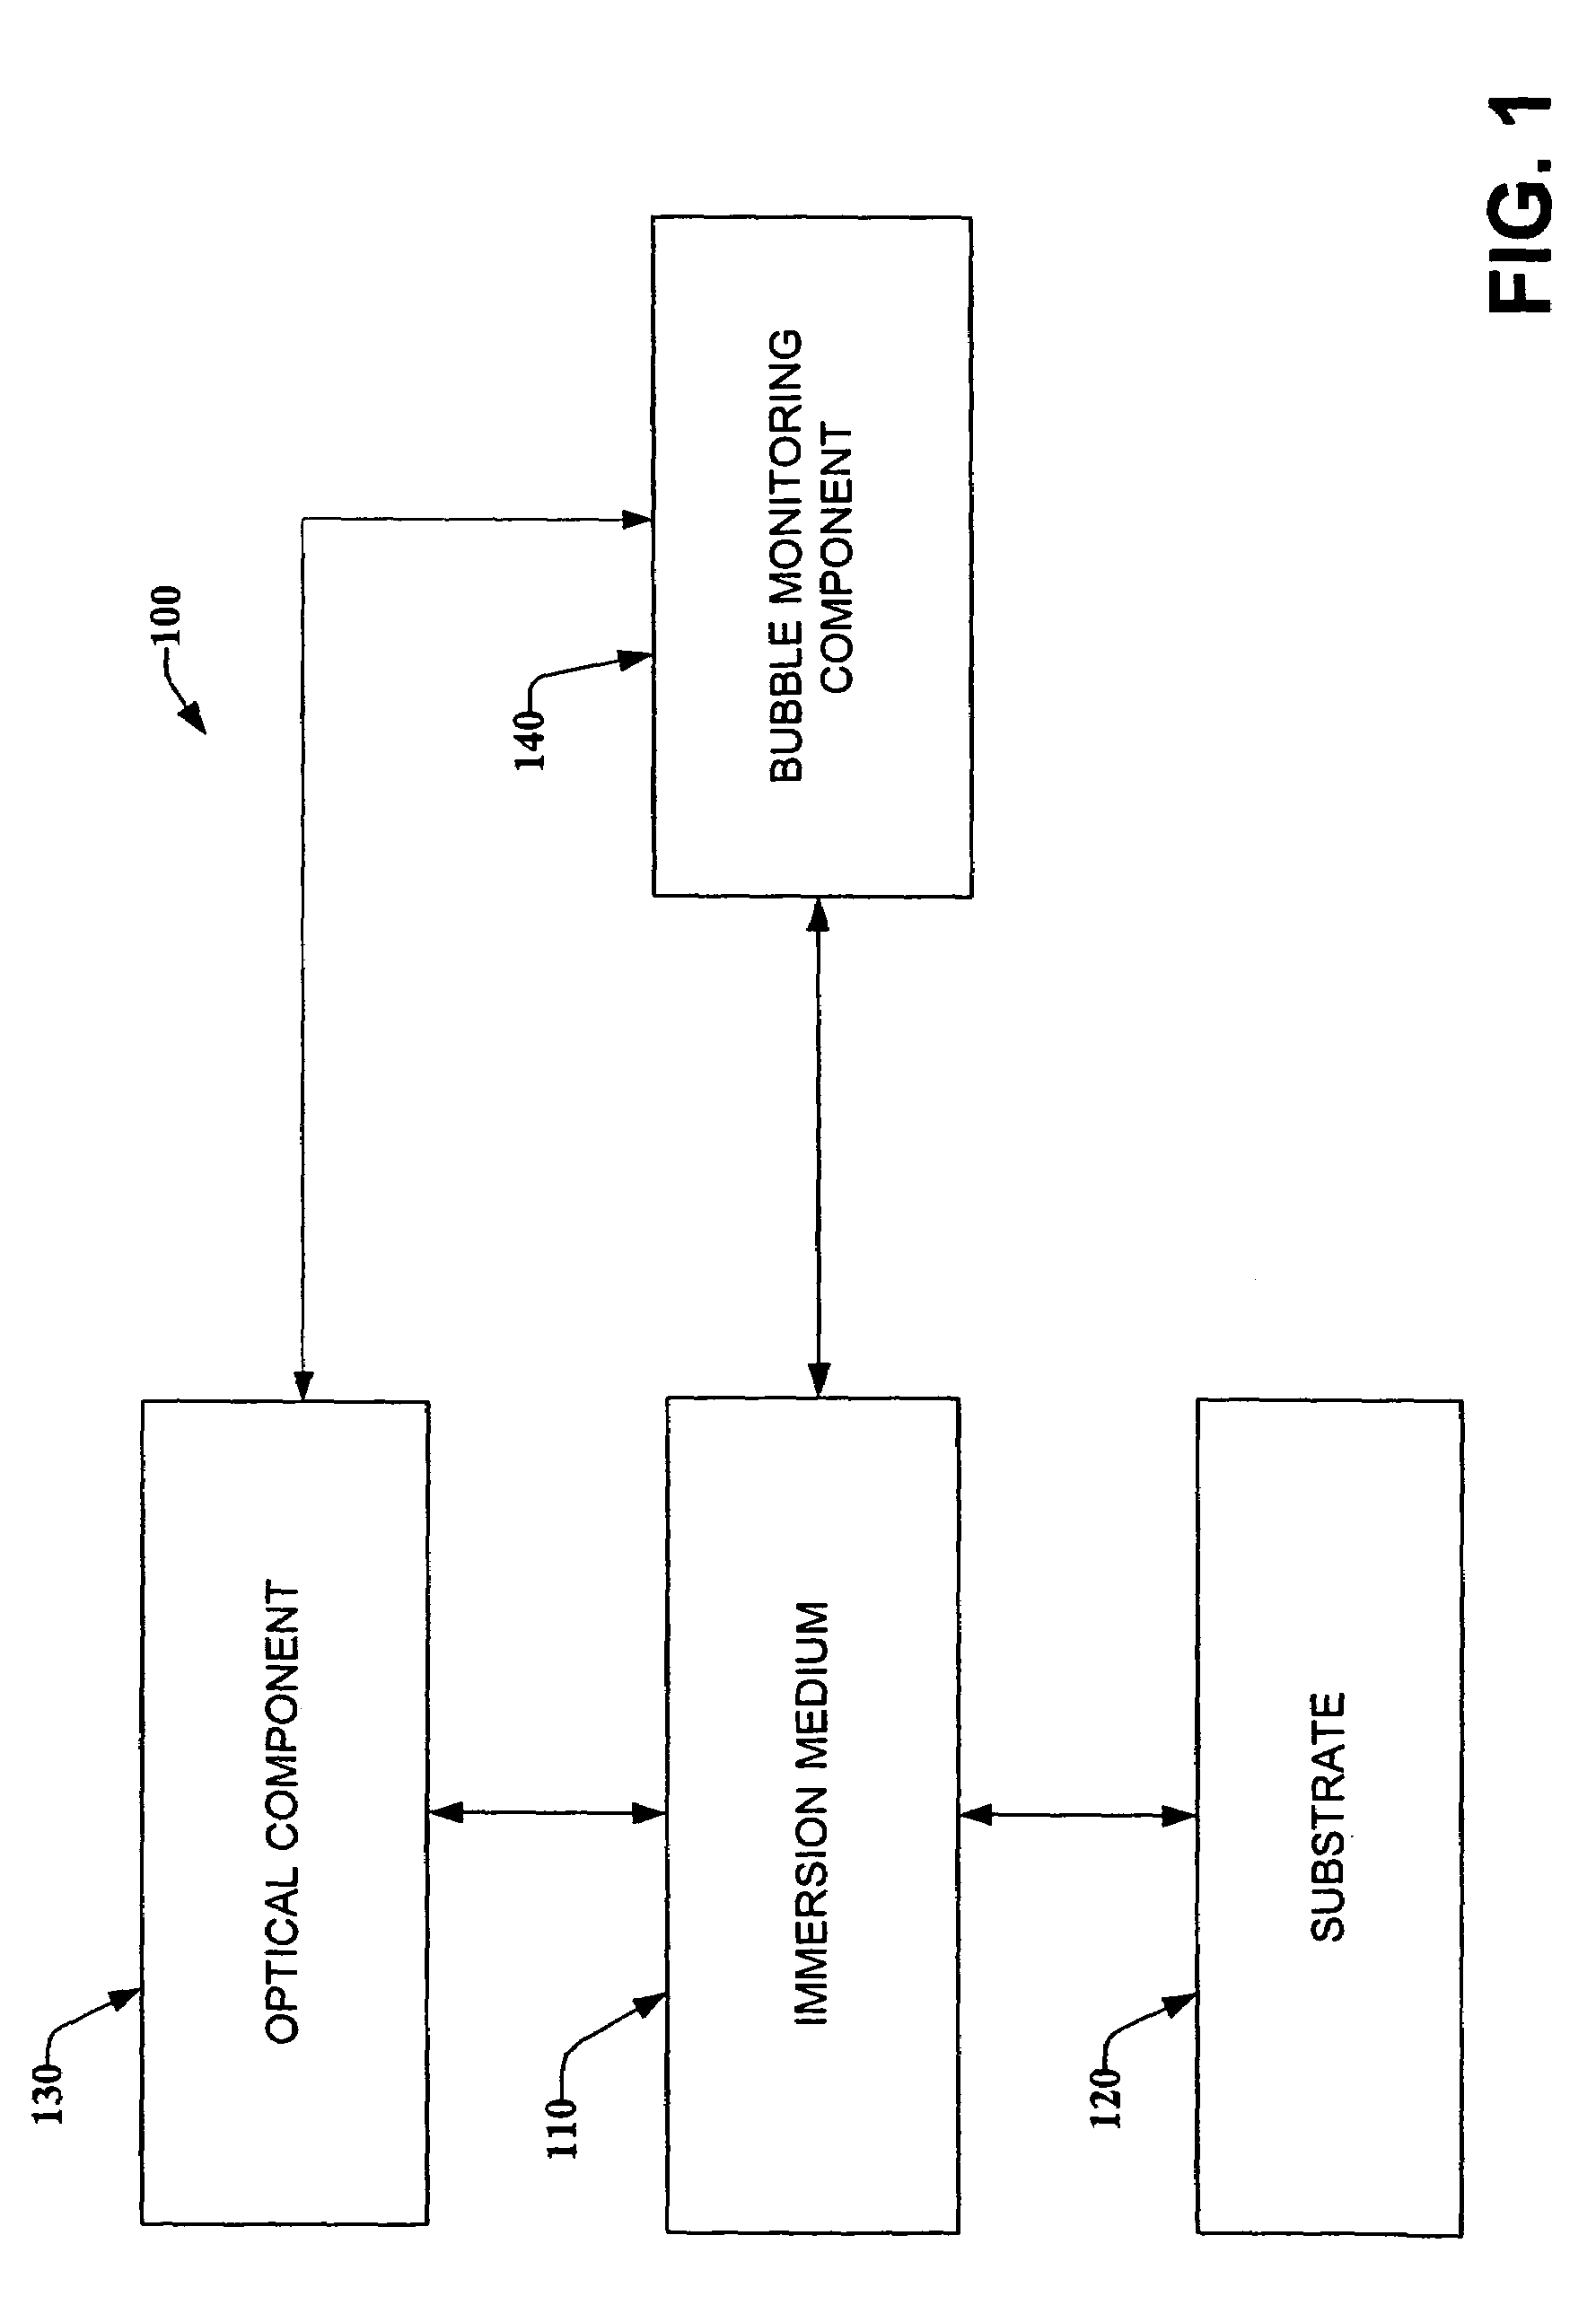 In-situ defect monitor and control system for immersion medium in immersion lithography